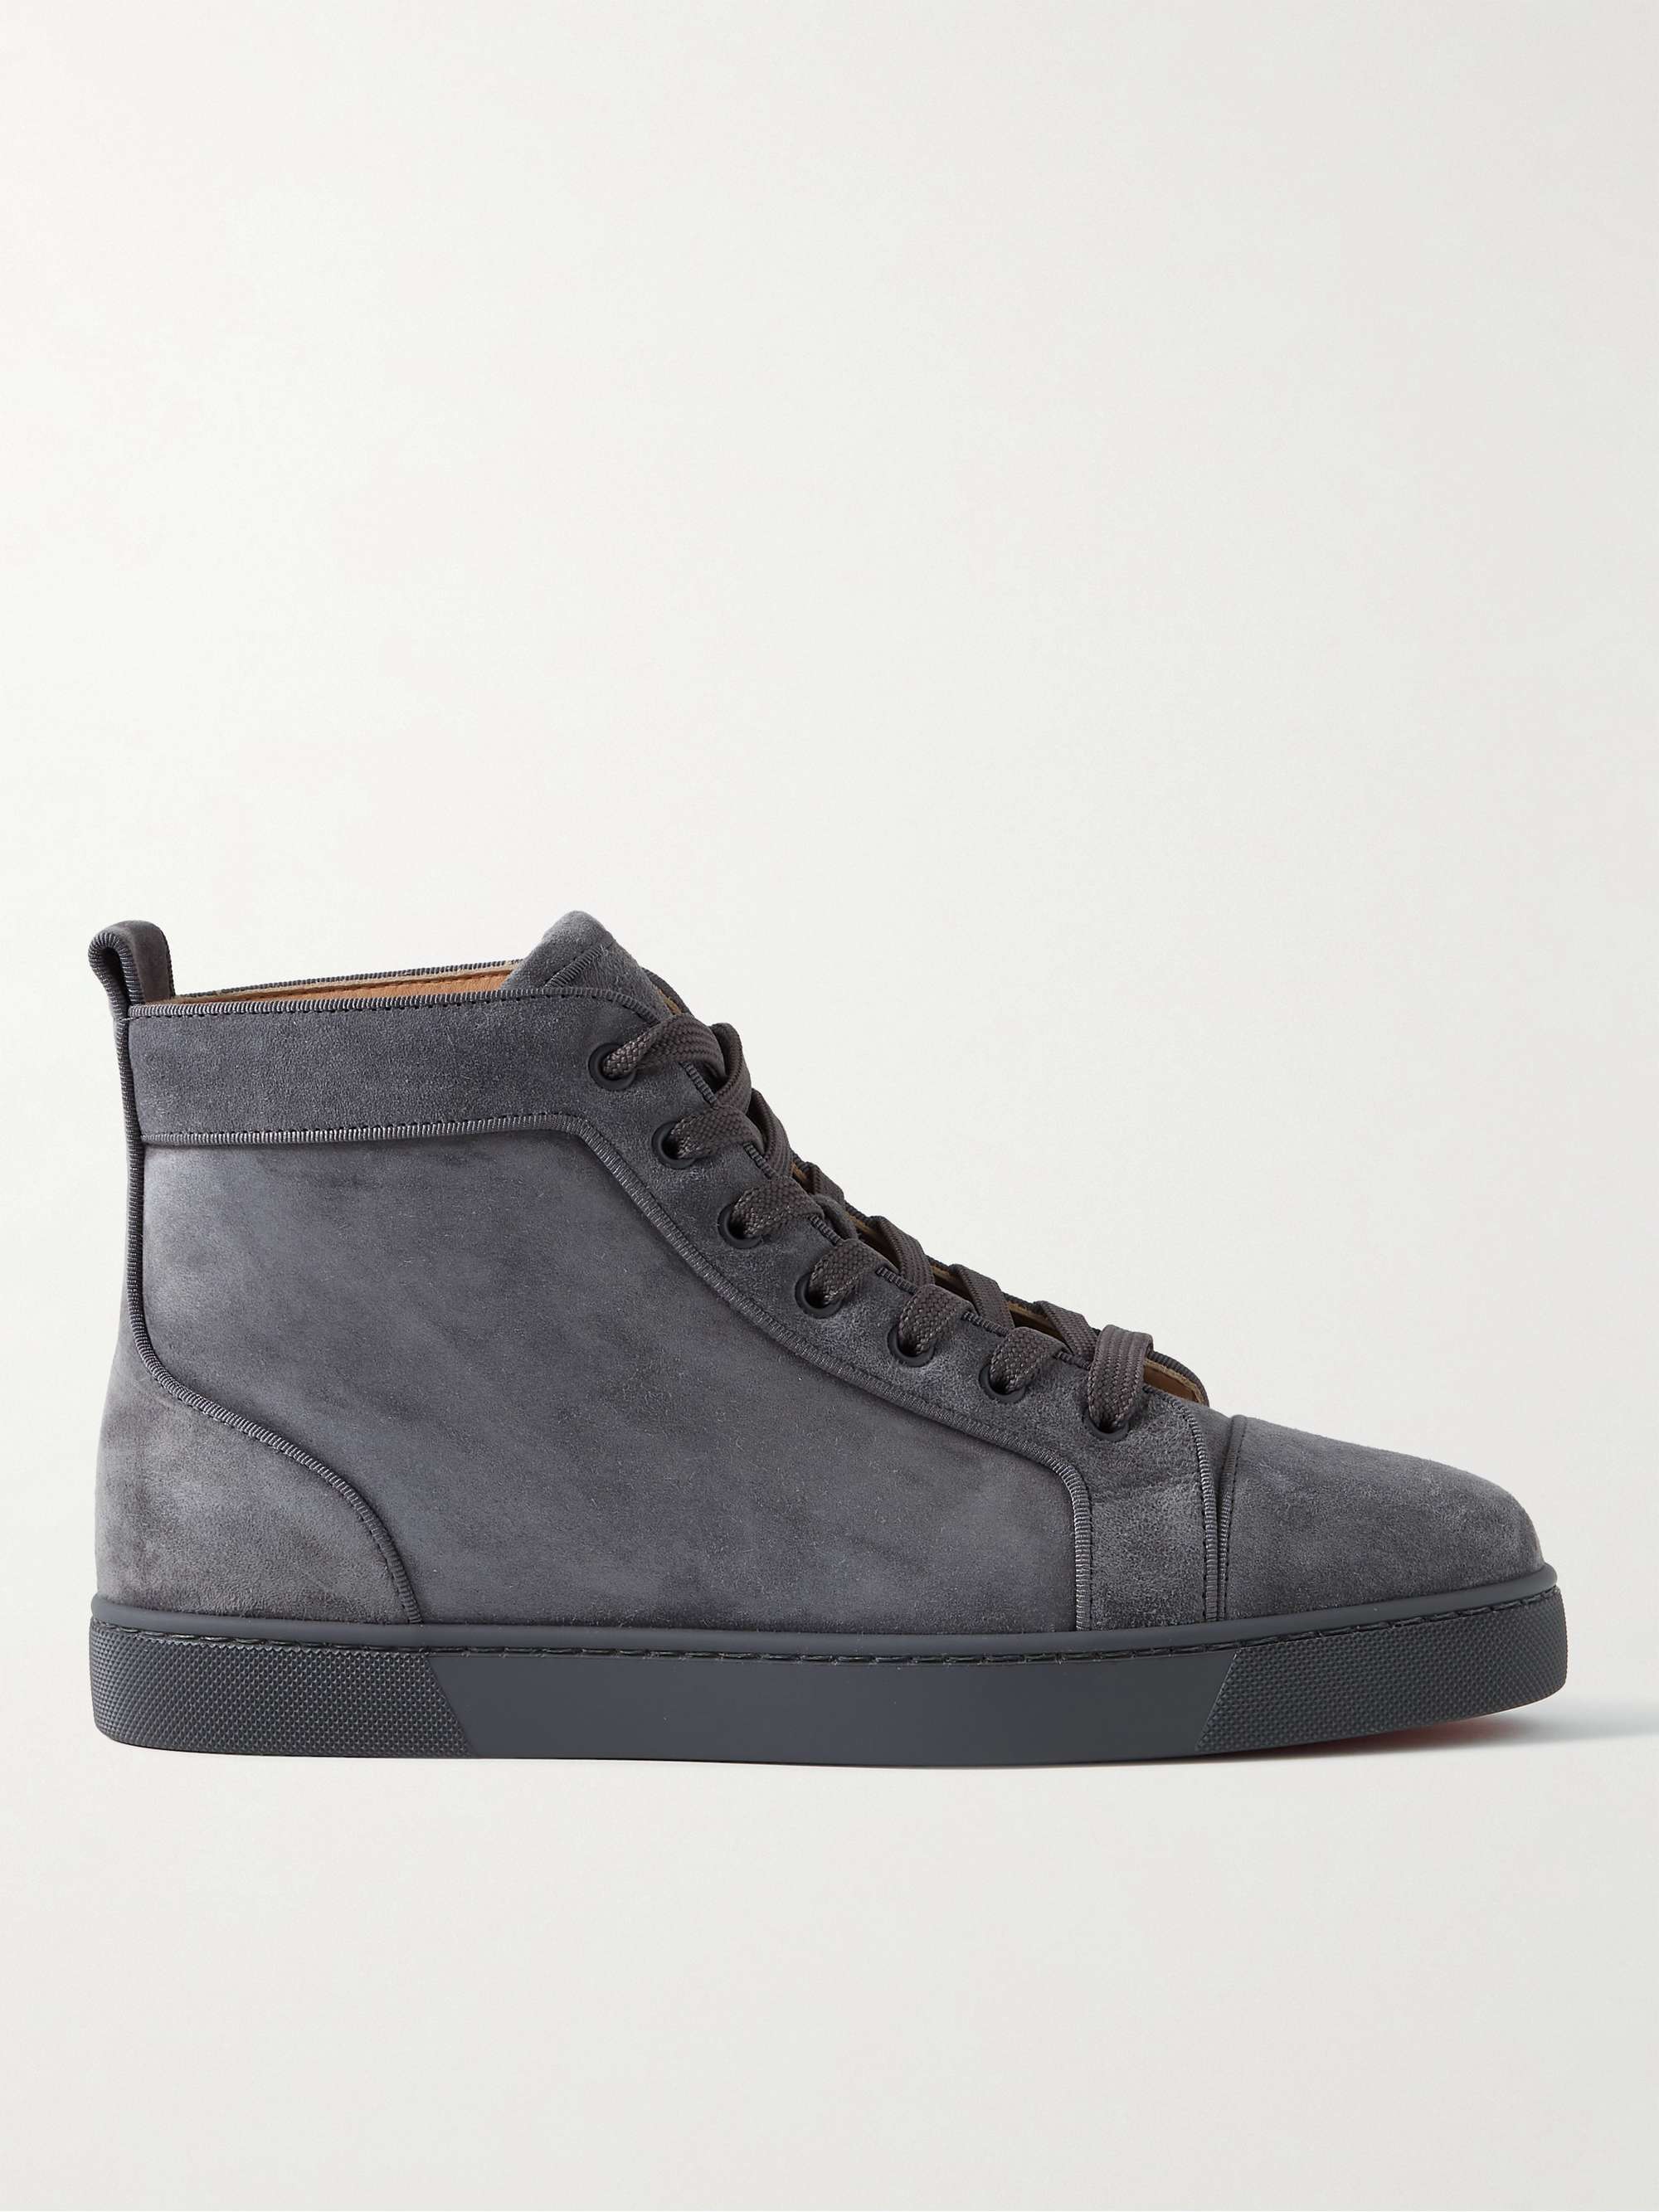 CHRISTIAN LOUBOUTIN Louis Orlato Grosgrain-Trimmed Suede High-Top Sneakers  for Men | MR PORTER